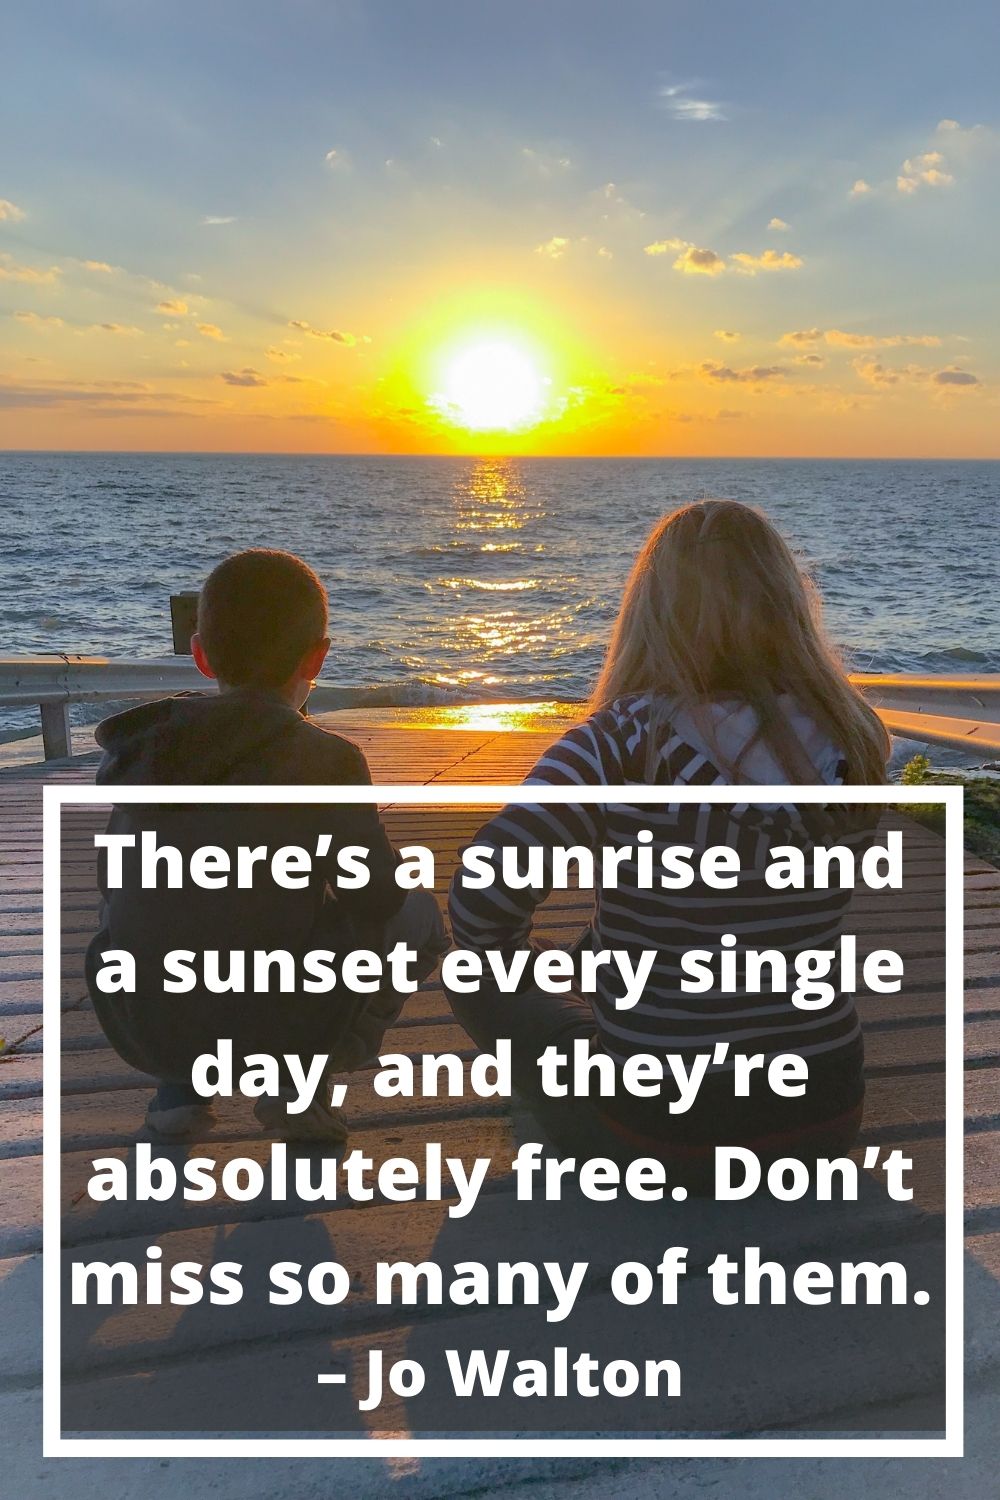 There’s a sunrise and a sunset every single day, and they’re absolutely free. Don’t miss so many of them. – Jo Walton